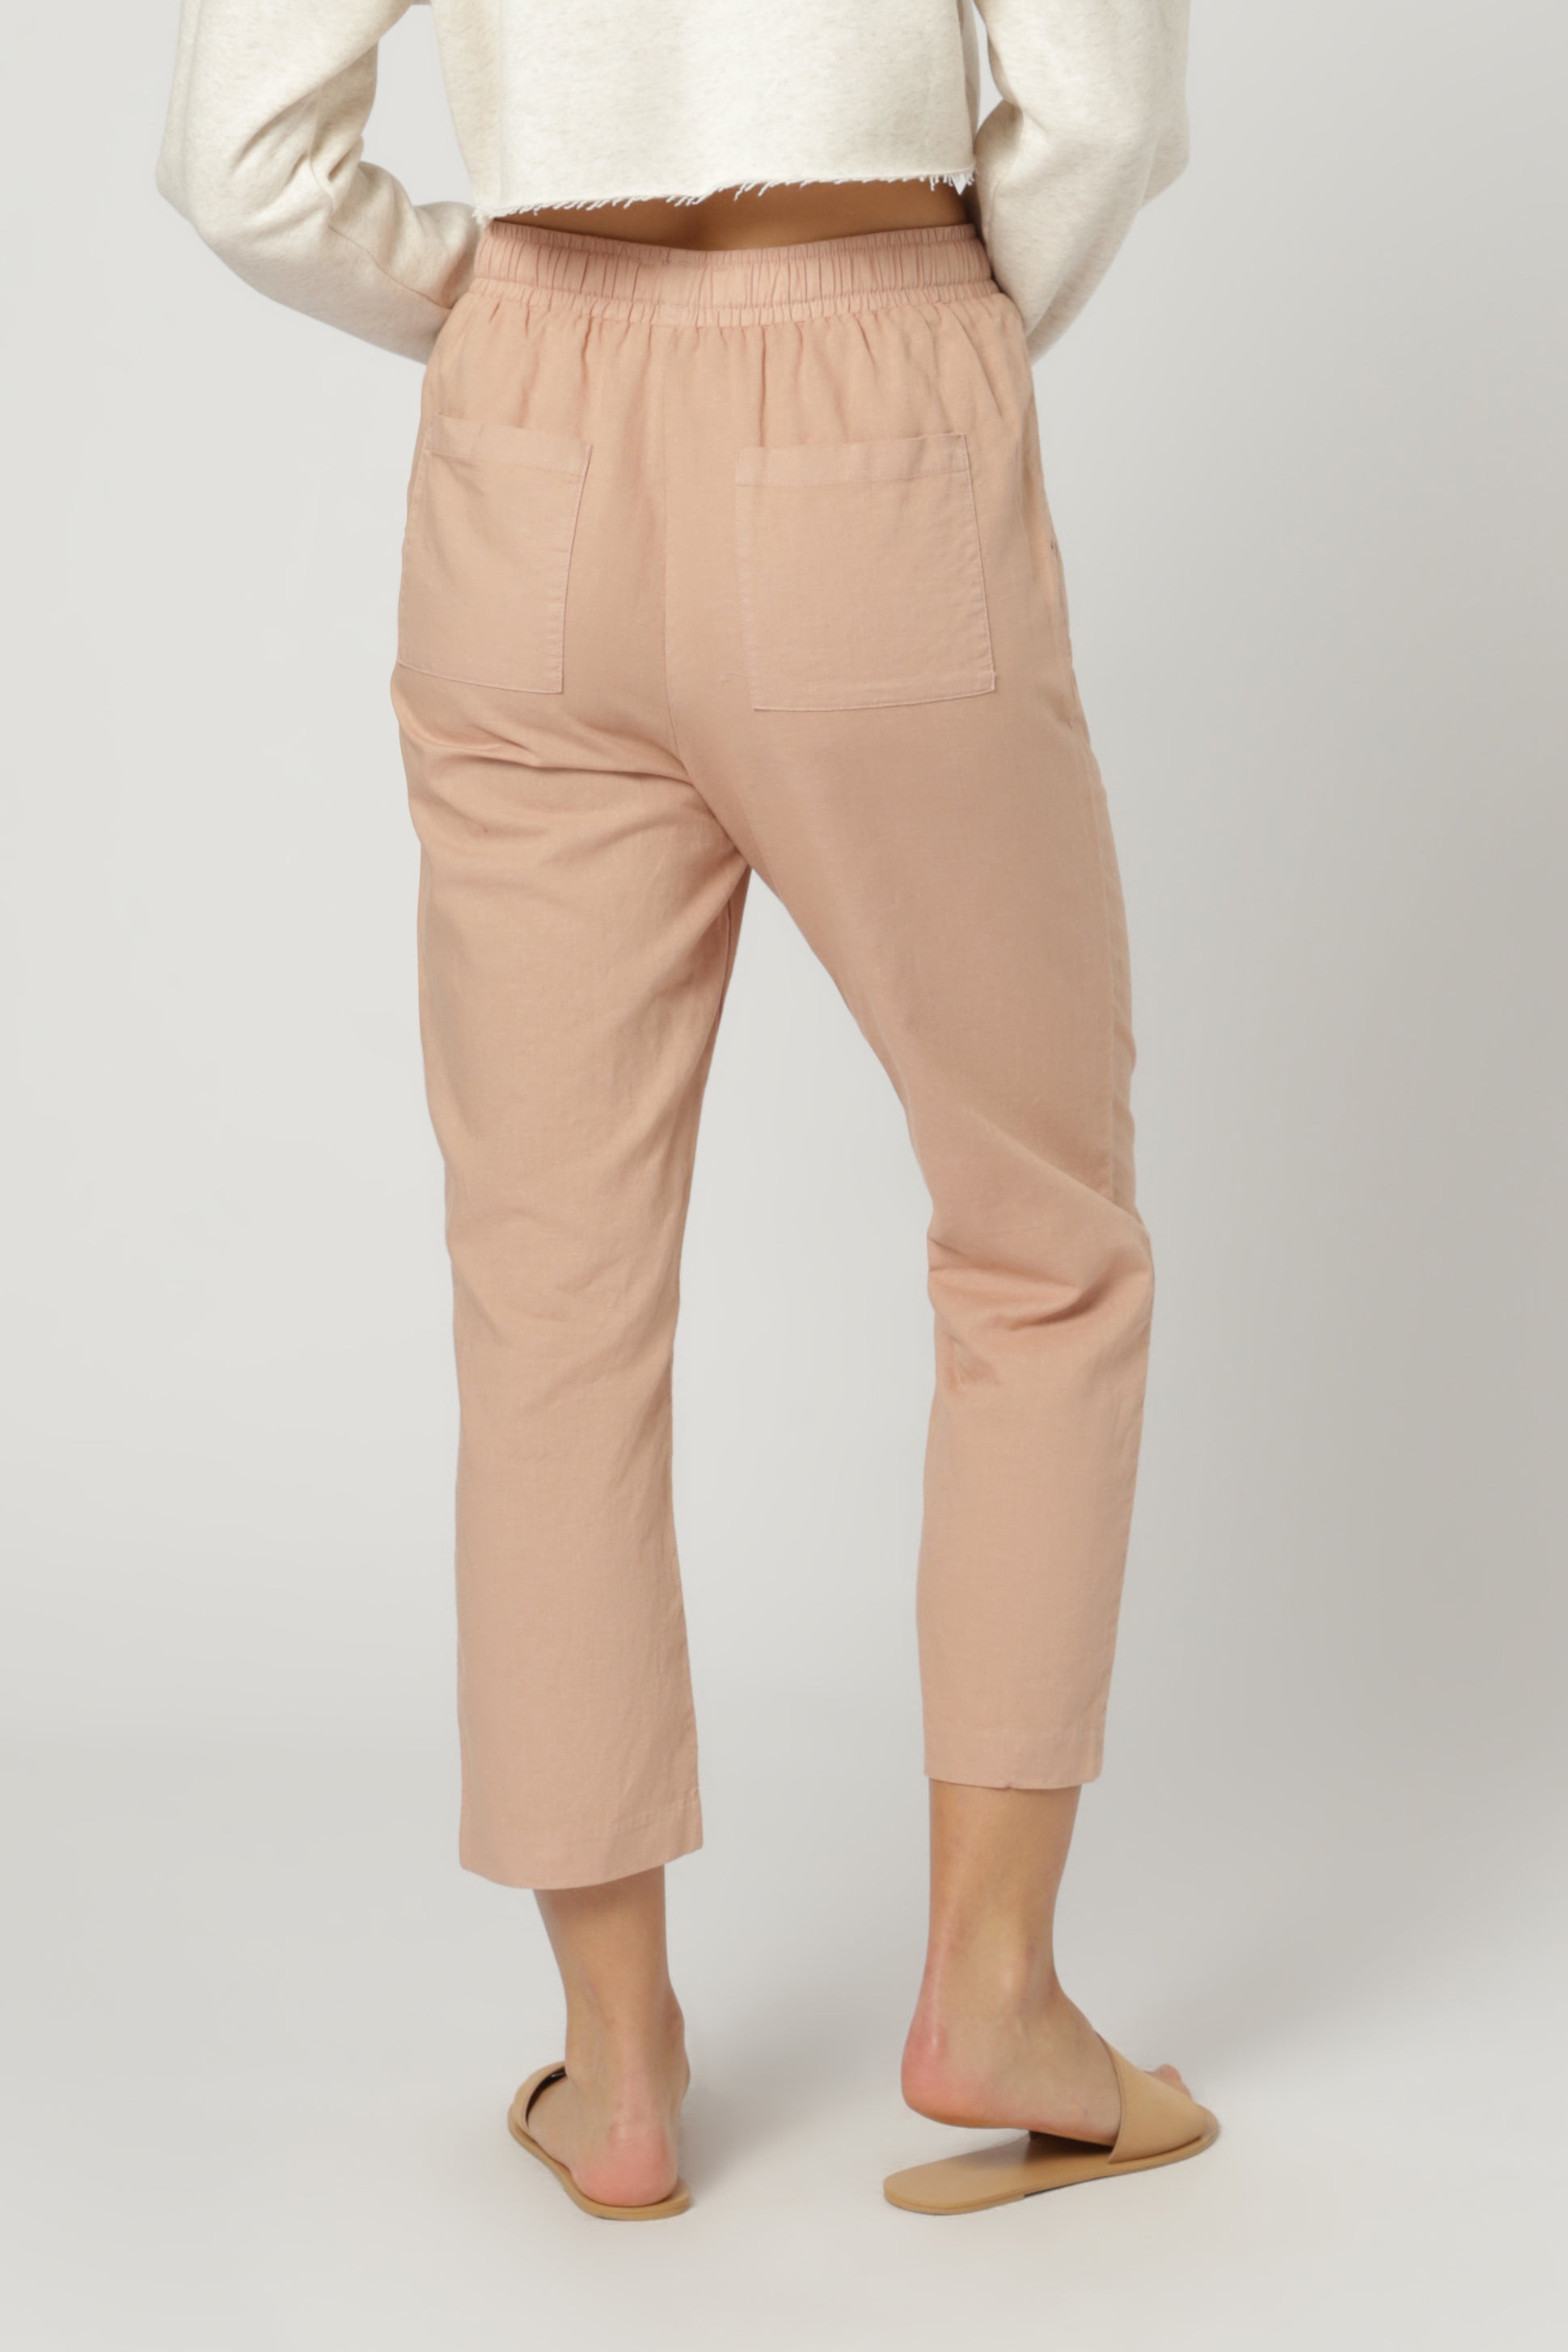 Nude Lucy nude classic pant deep blush pants